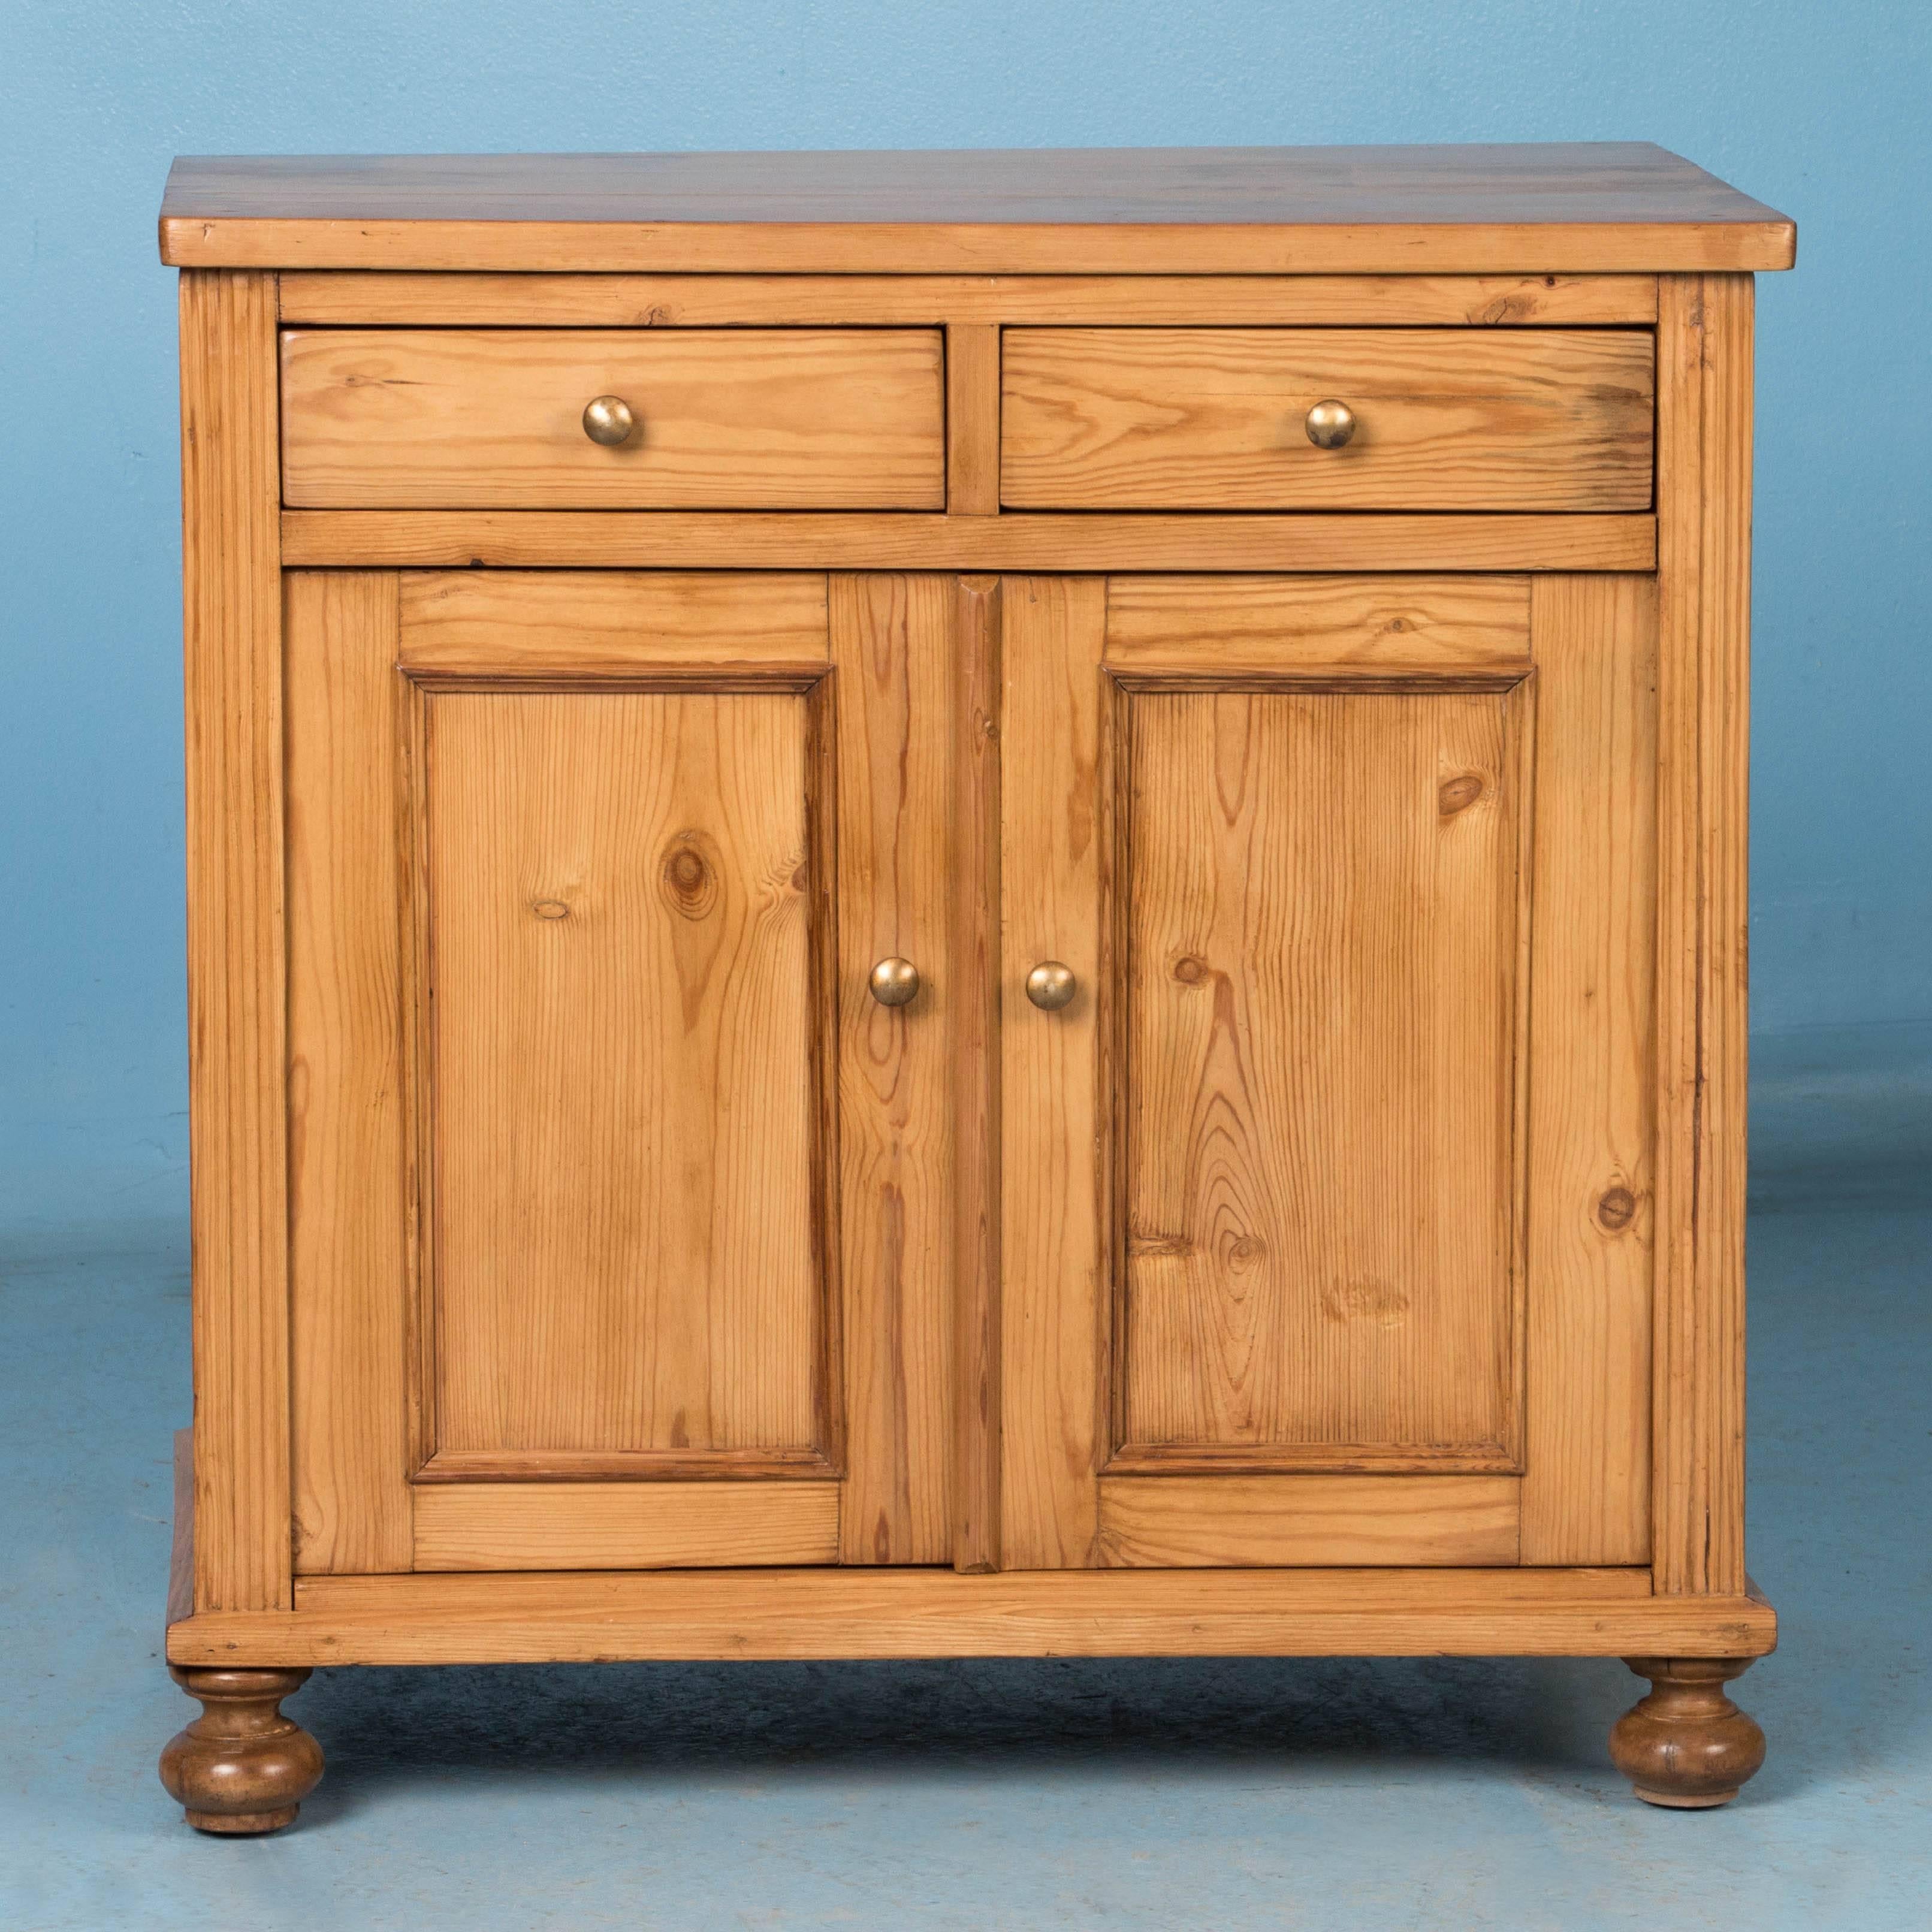 This European country sideboard was crafted around 1890 in Denmark and features simple lines and paneled cabinet doors with traditional bun feet in front. It has been completely restored and is strong, functional and ready for use while the wax